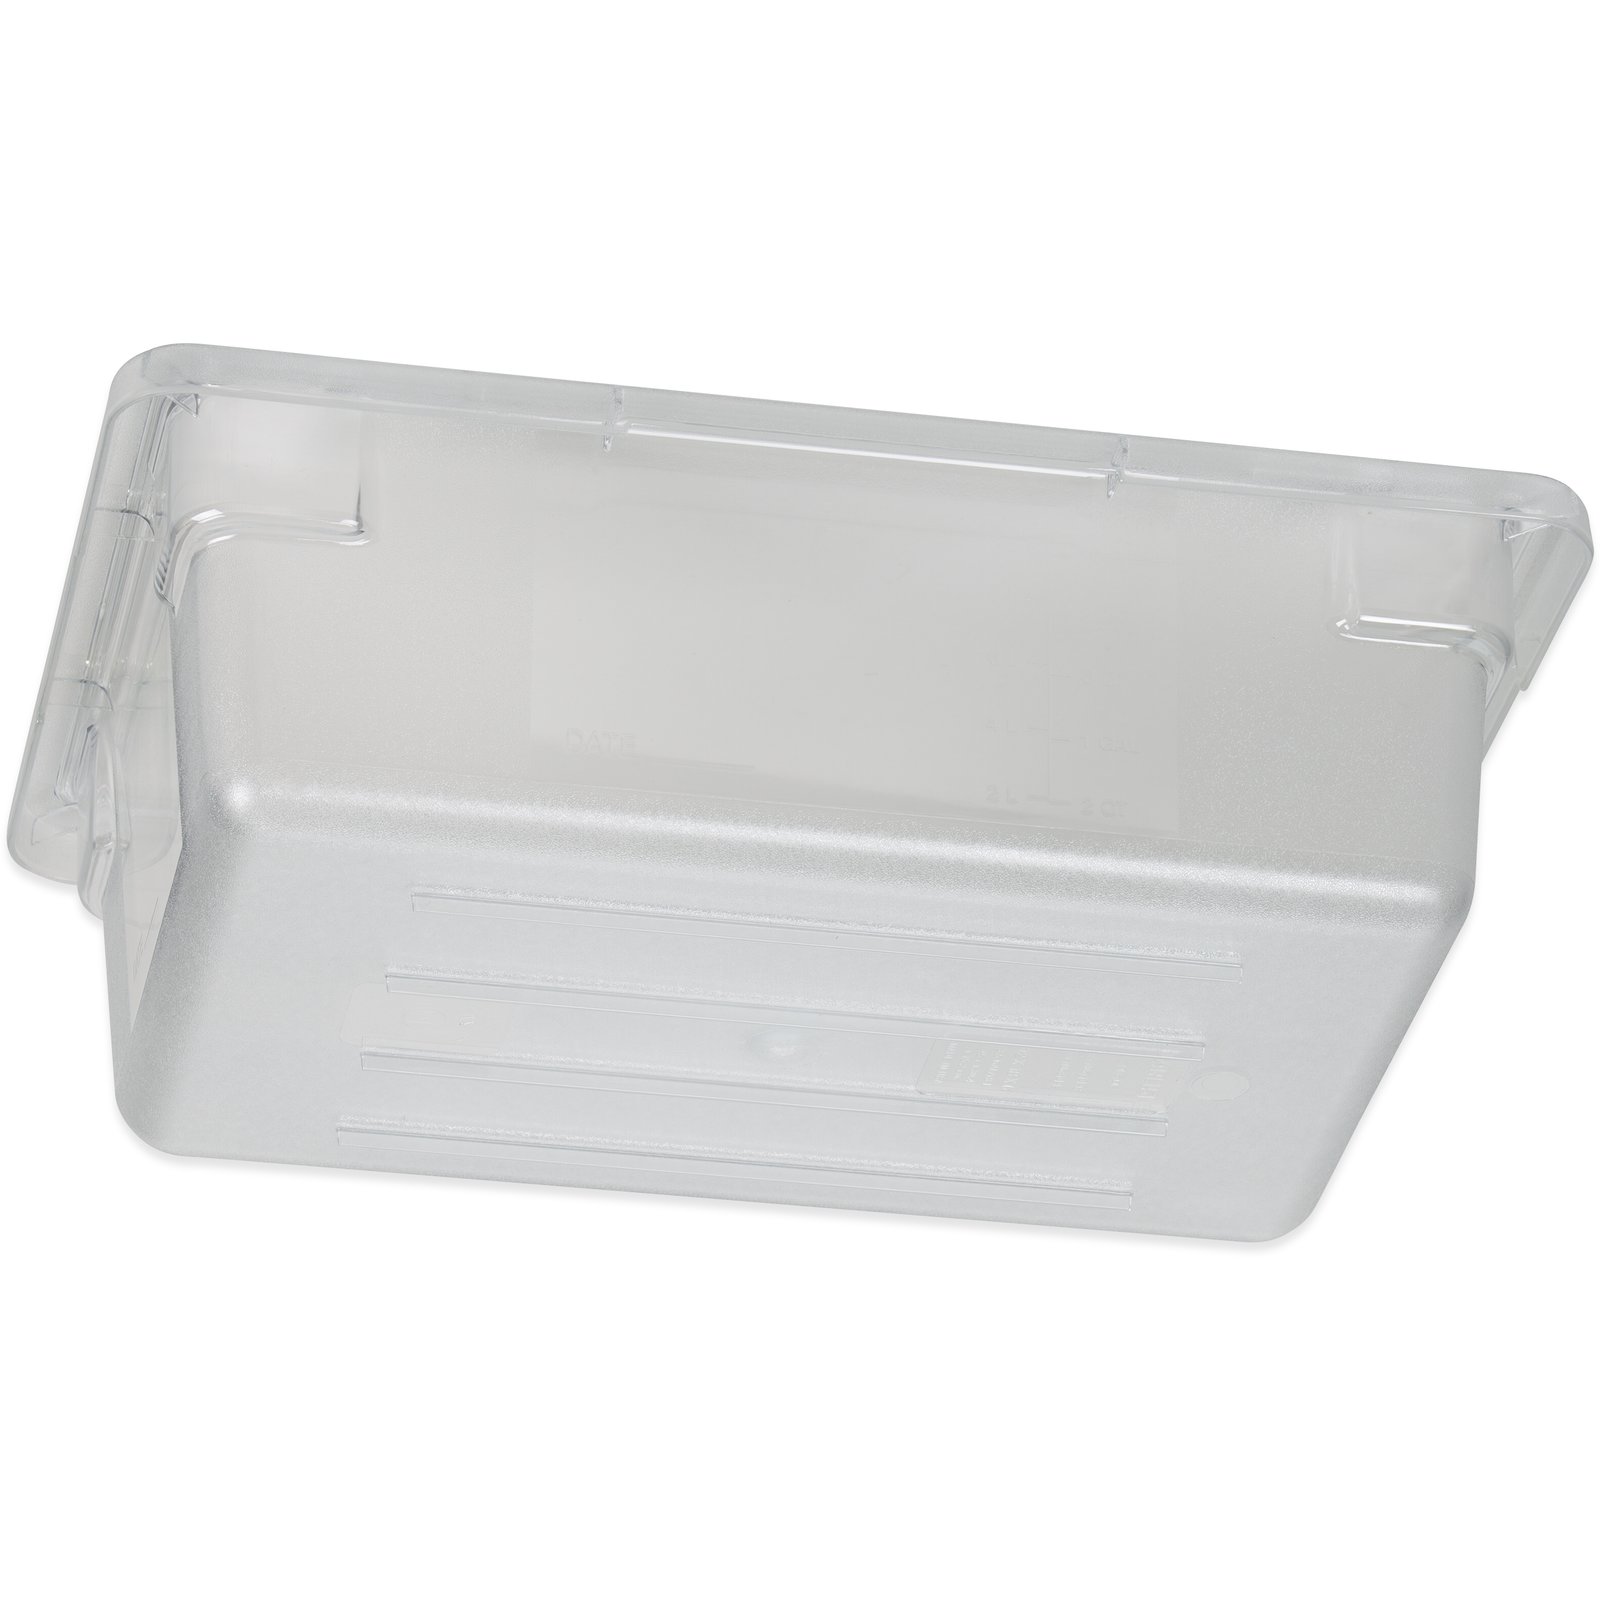 2 Gallon Food Storage Container Rubbermaid® with Clear Polycarbonate